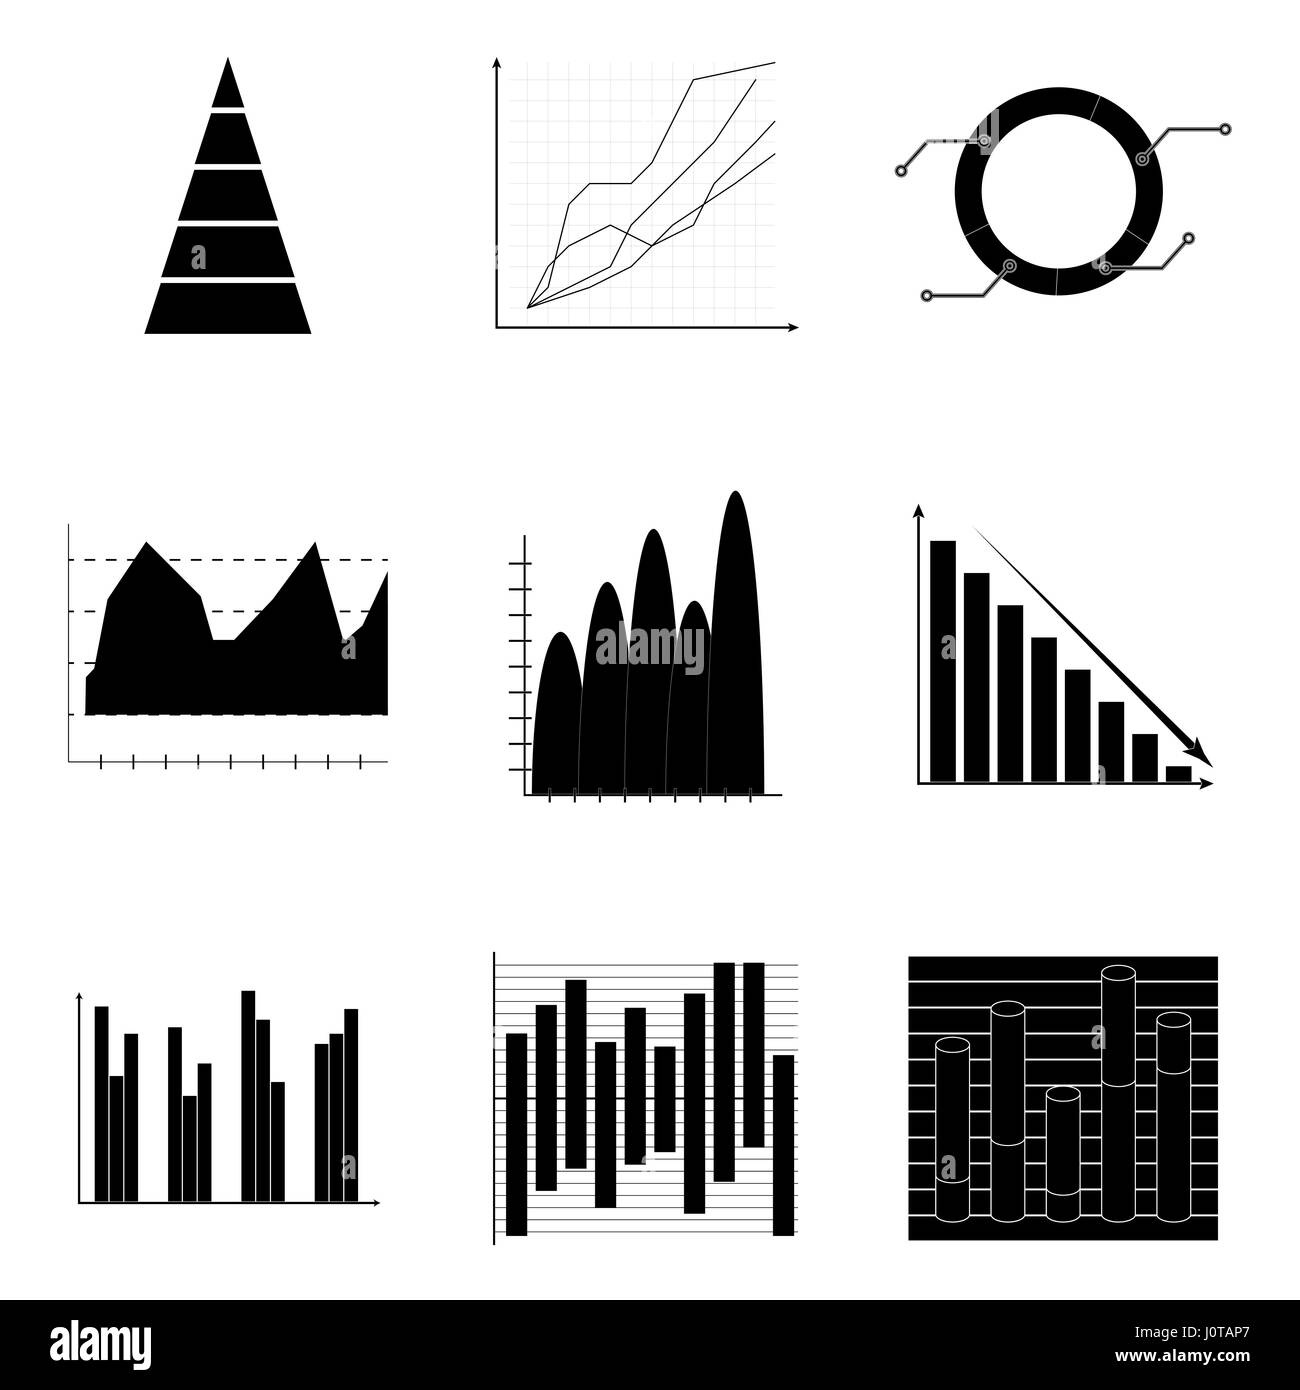 Graph and charts. Business infograph and diagram, vector illustration Stock Photo